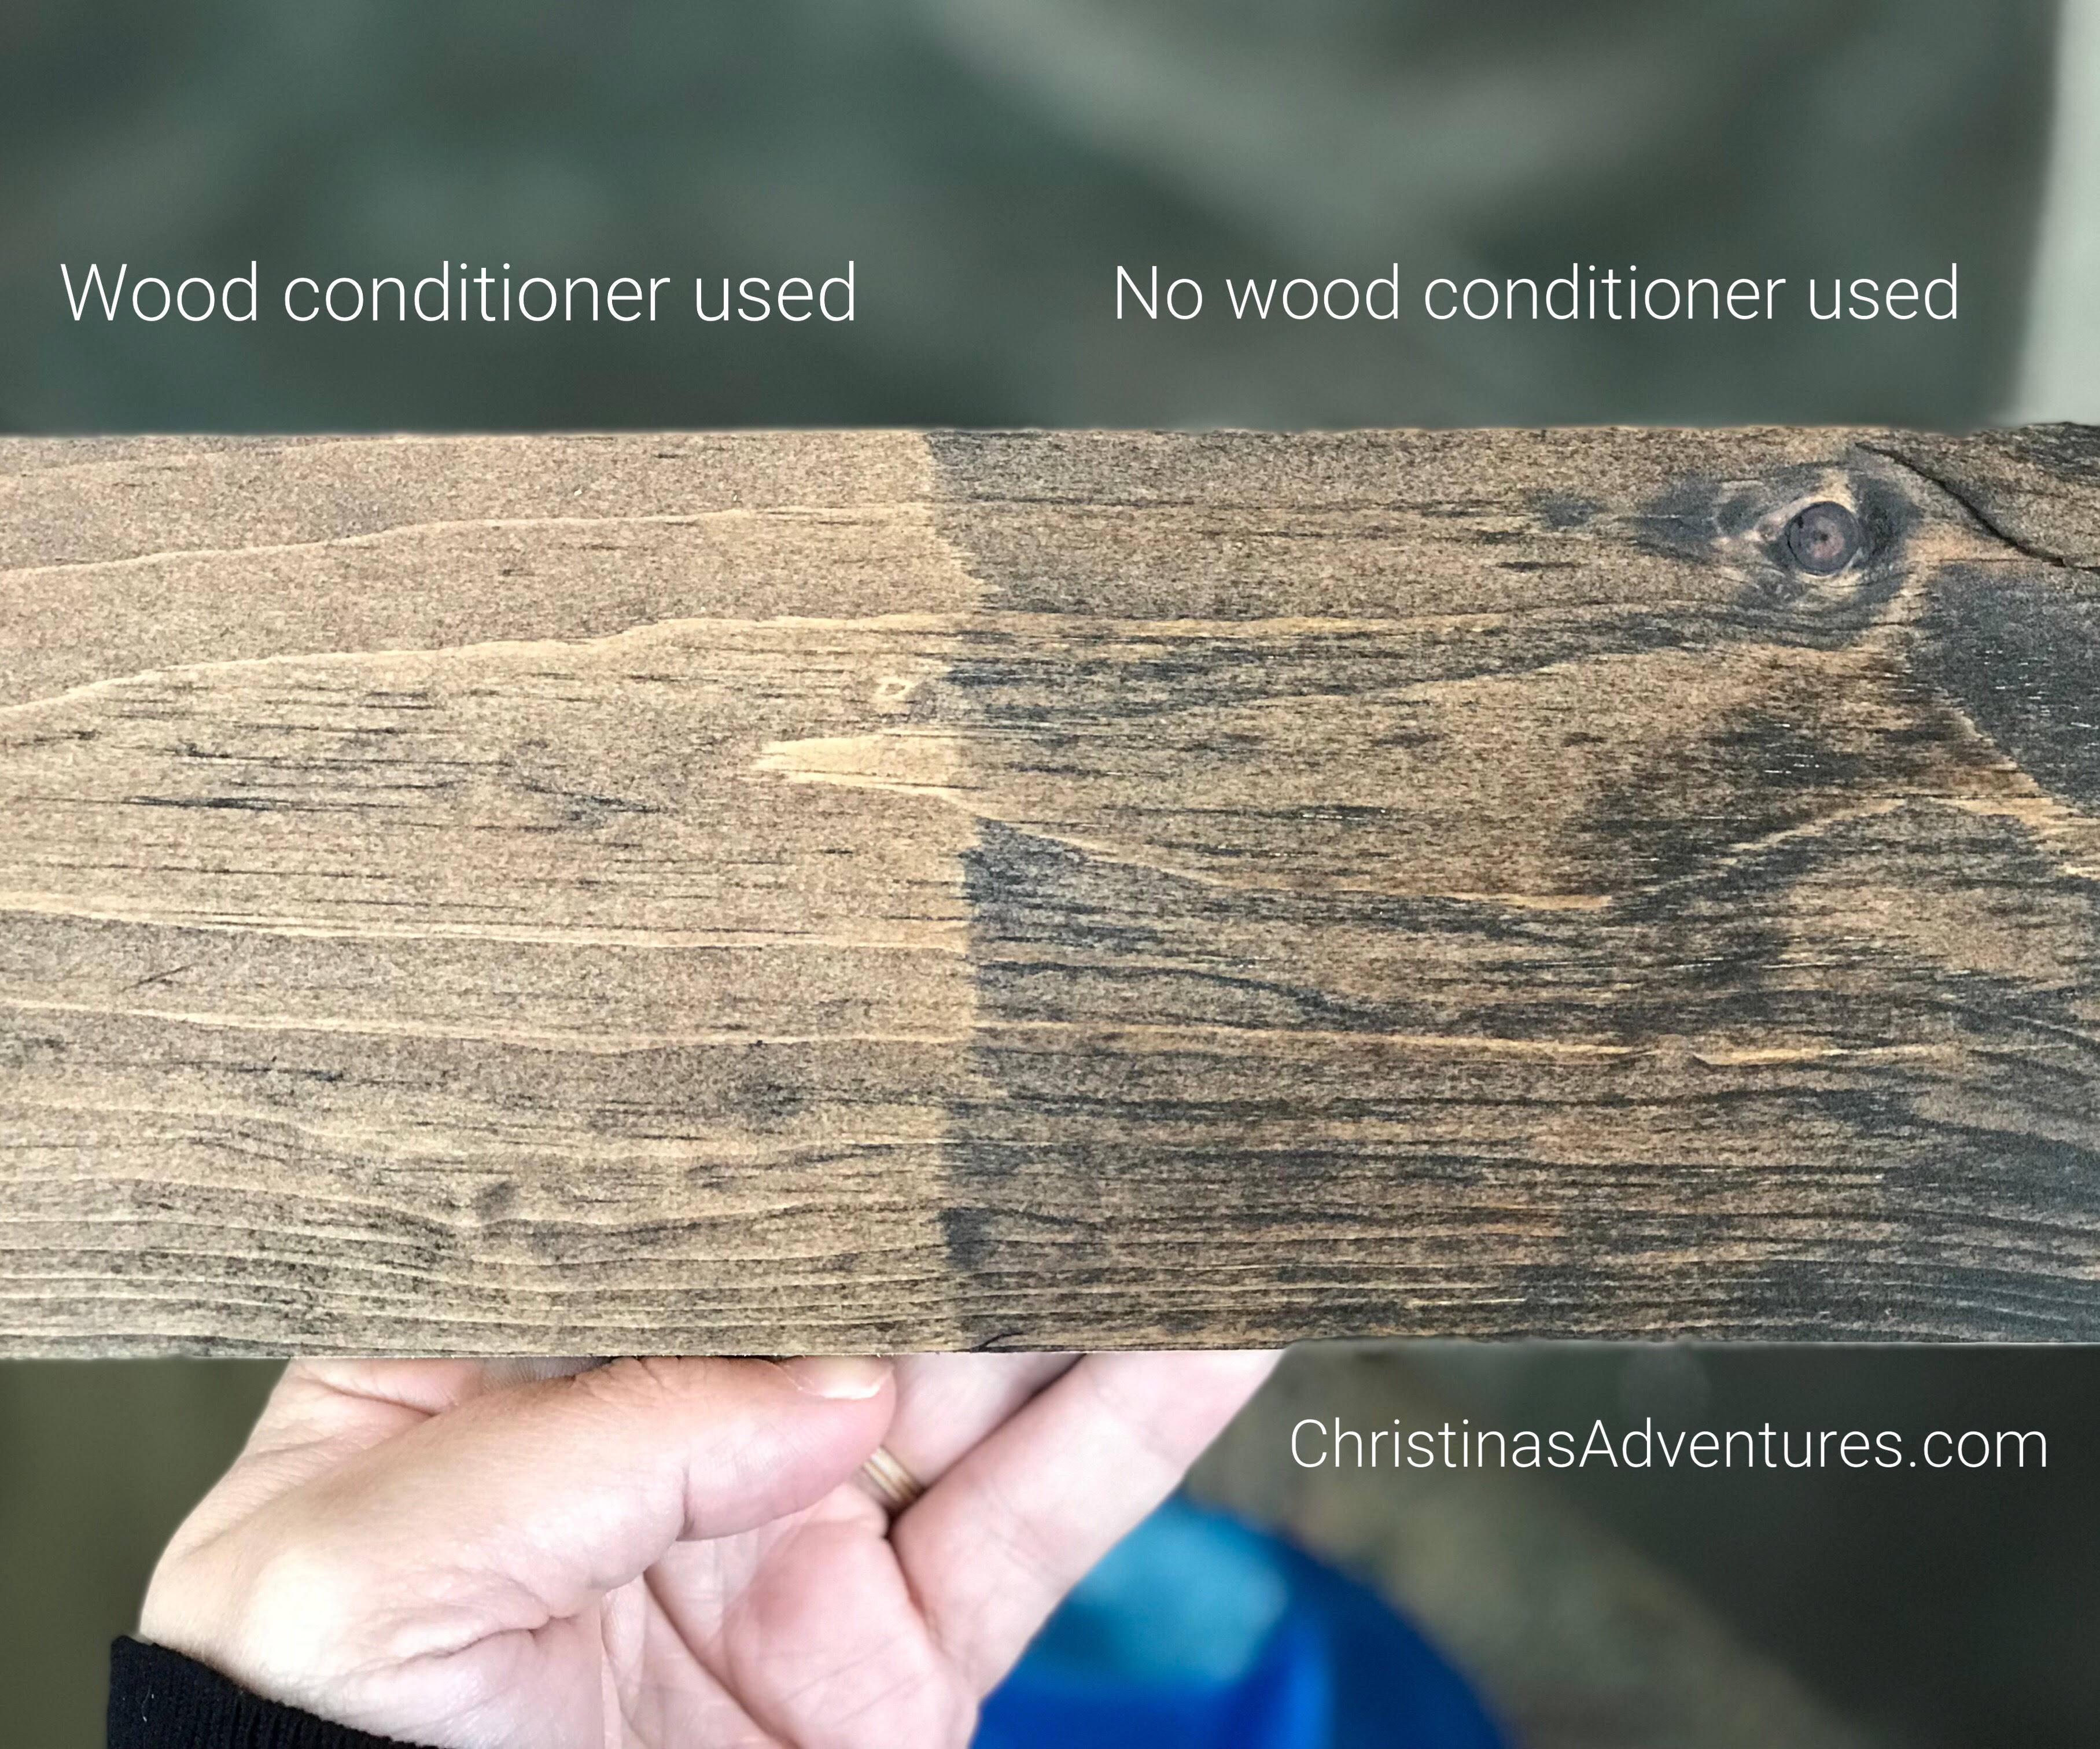 Wood Sanding, Staining, and Prepping Guide - DIY Tips and Tricks